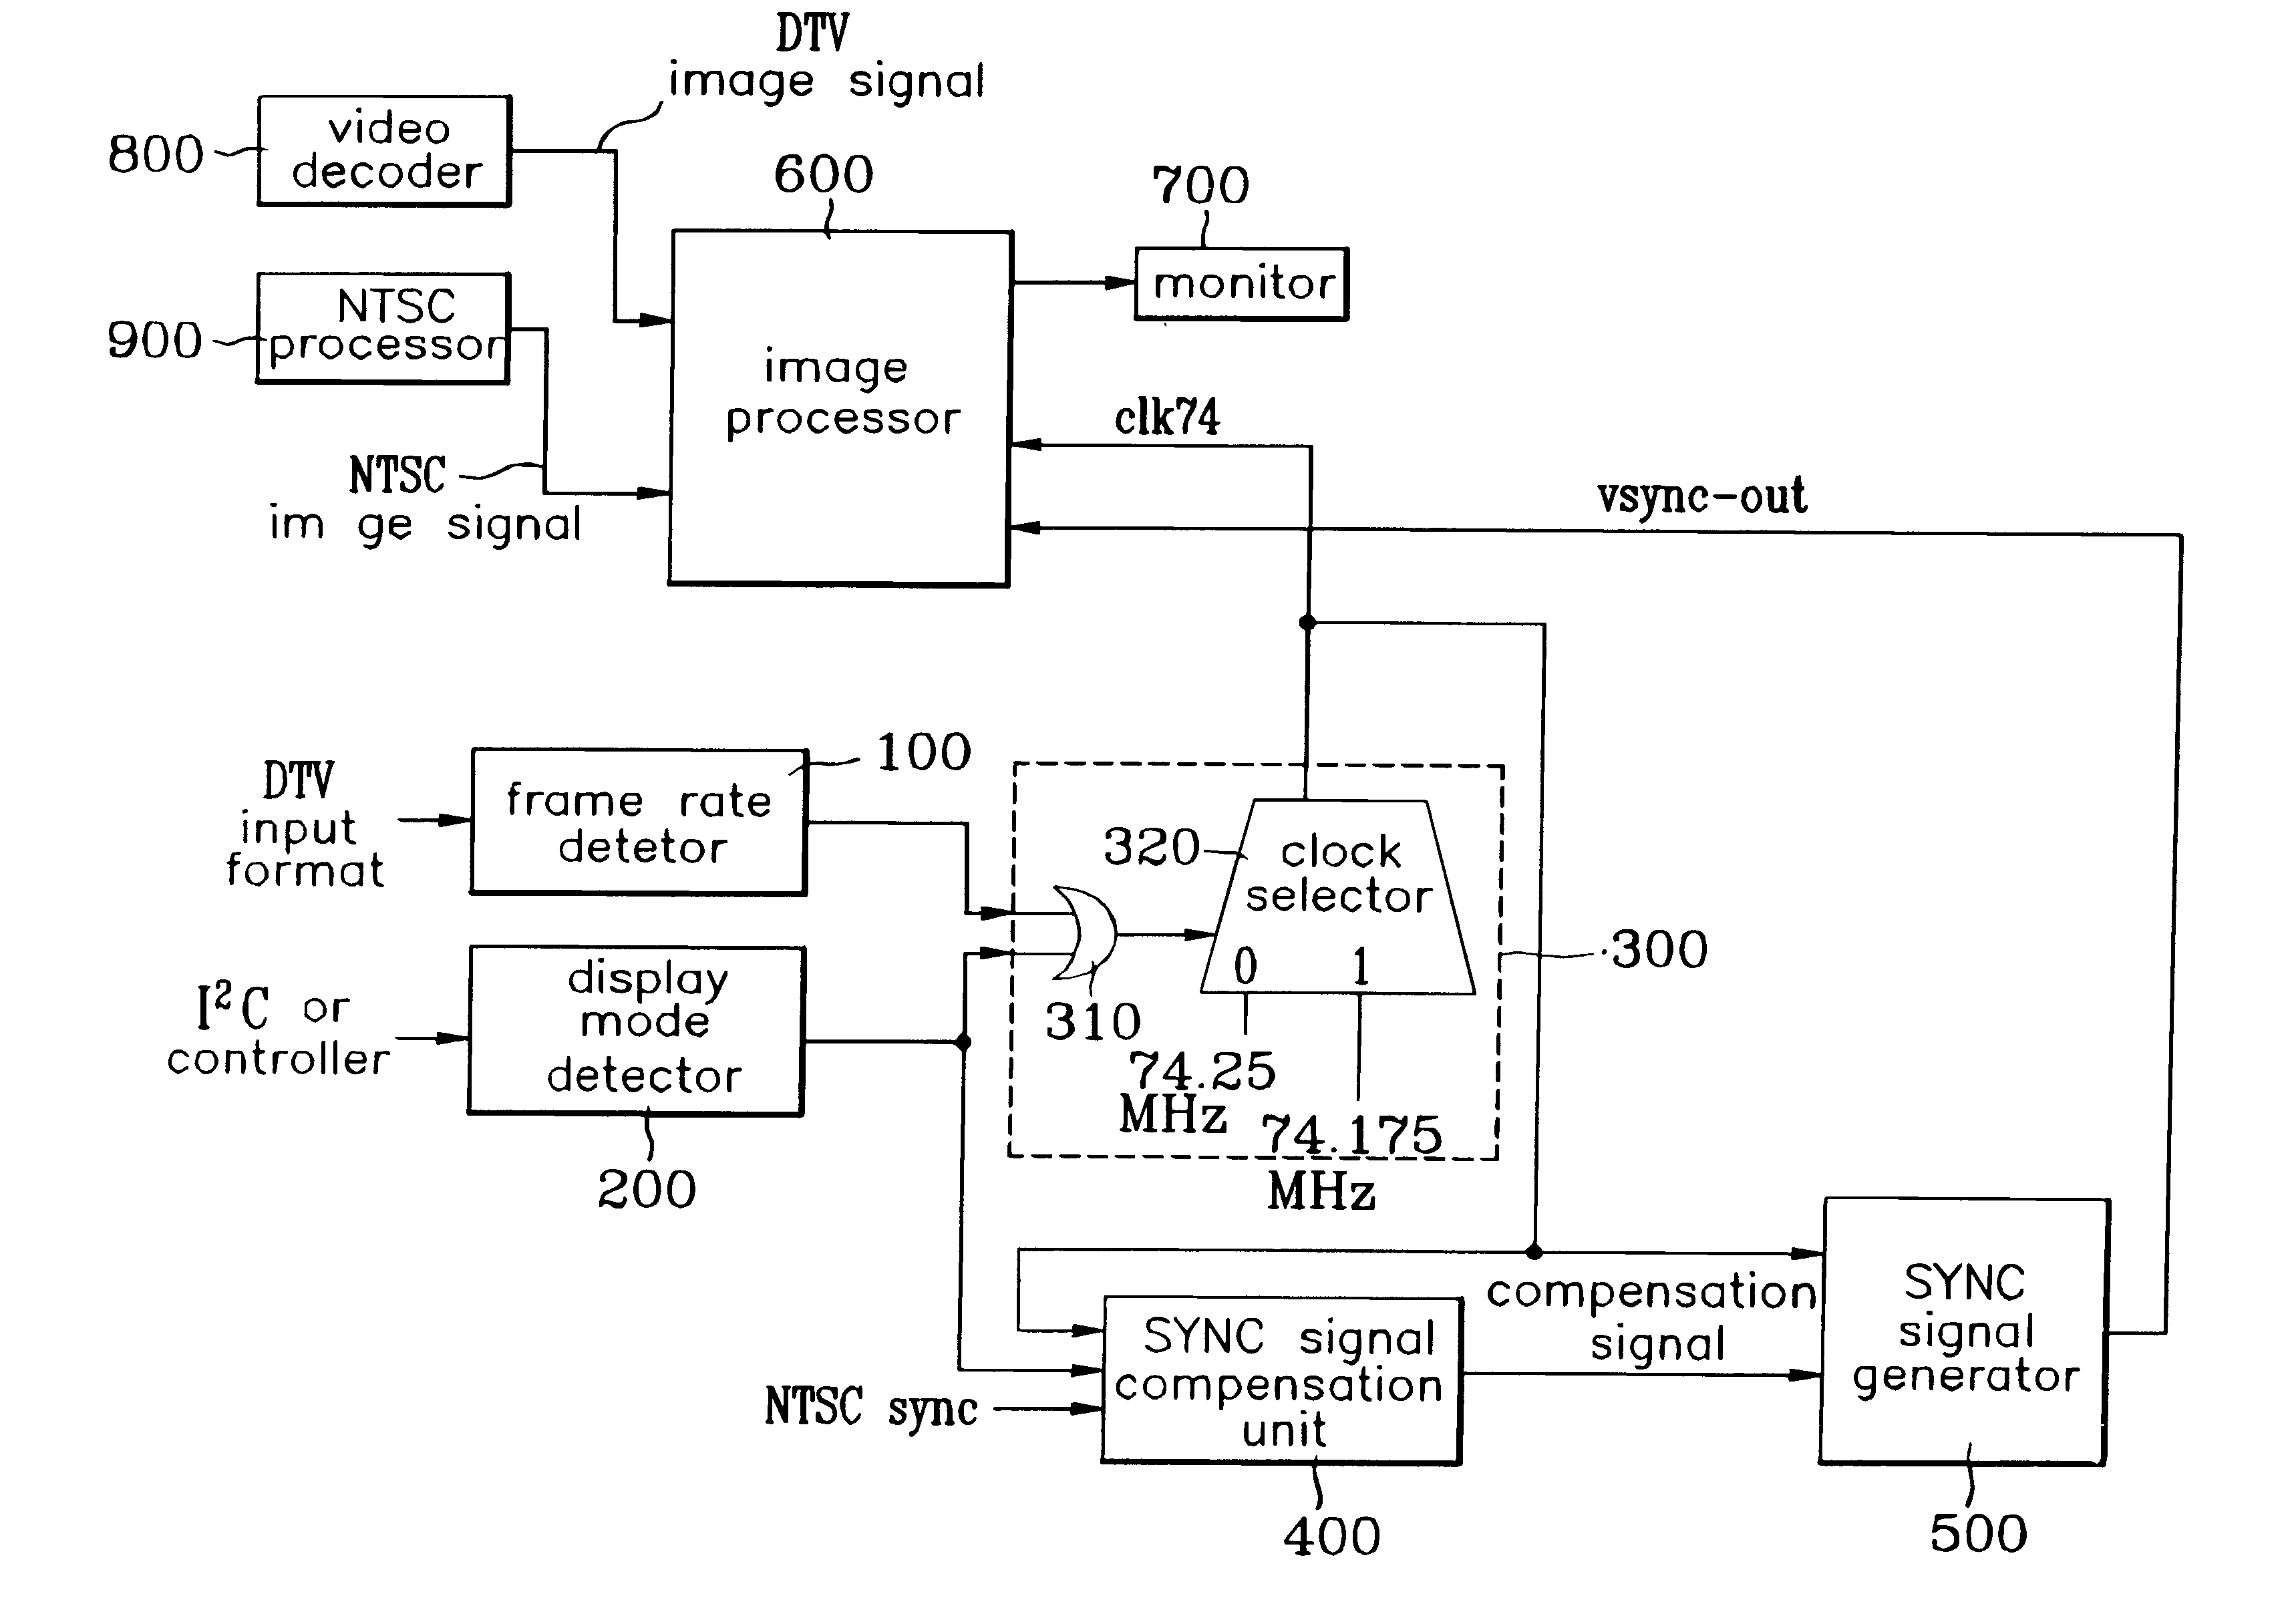 Sync signal generating apparatus and method for a video signal processor